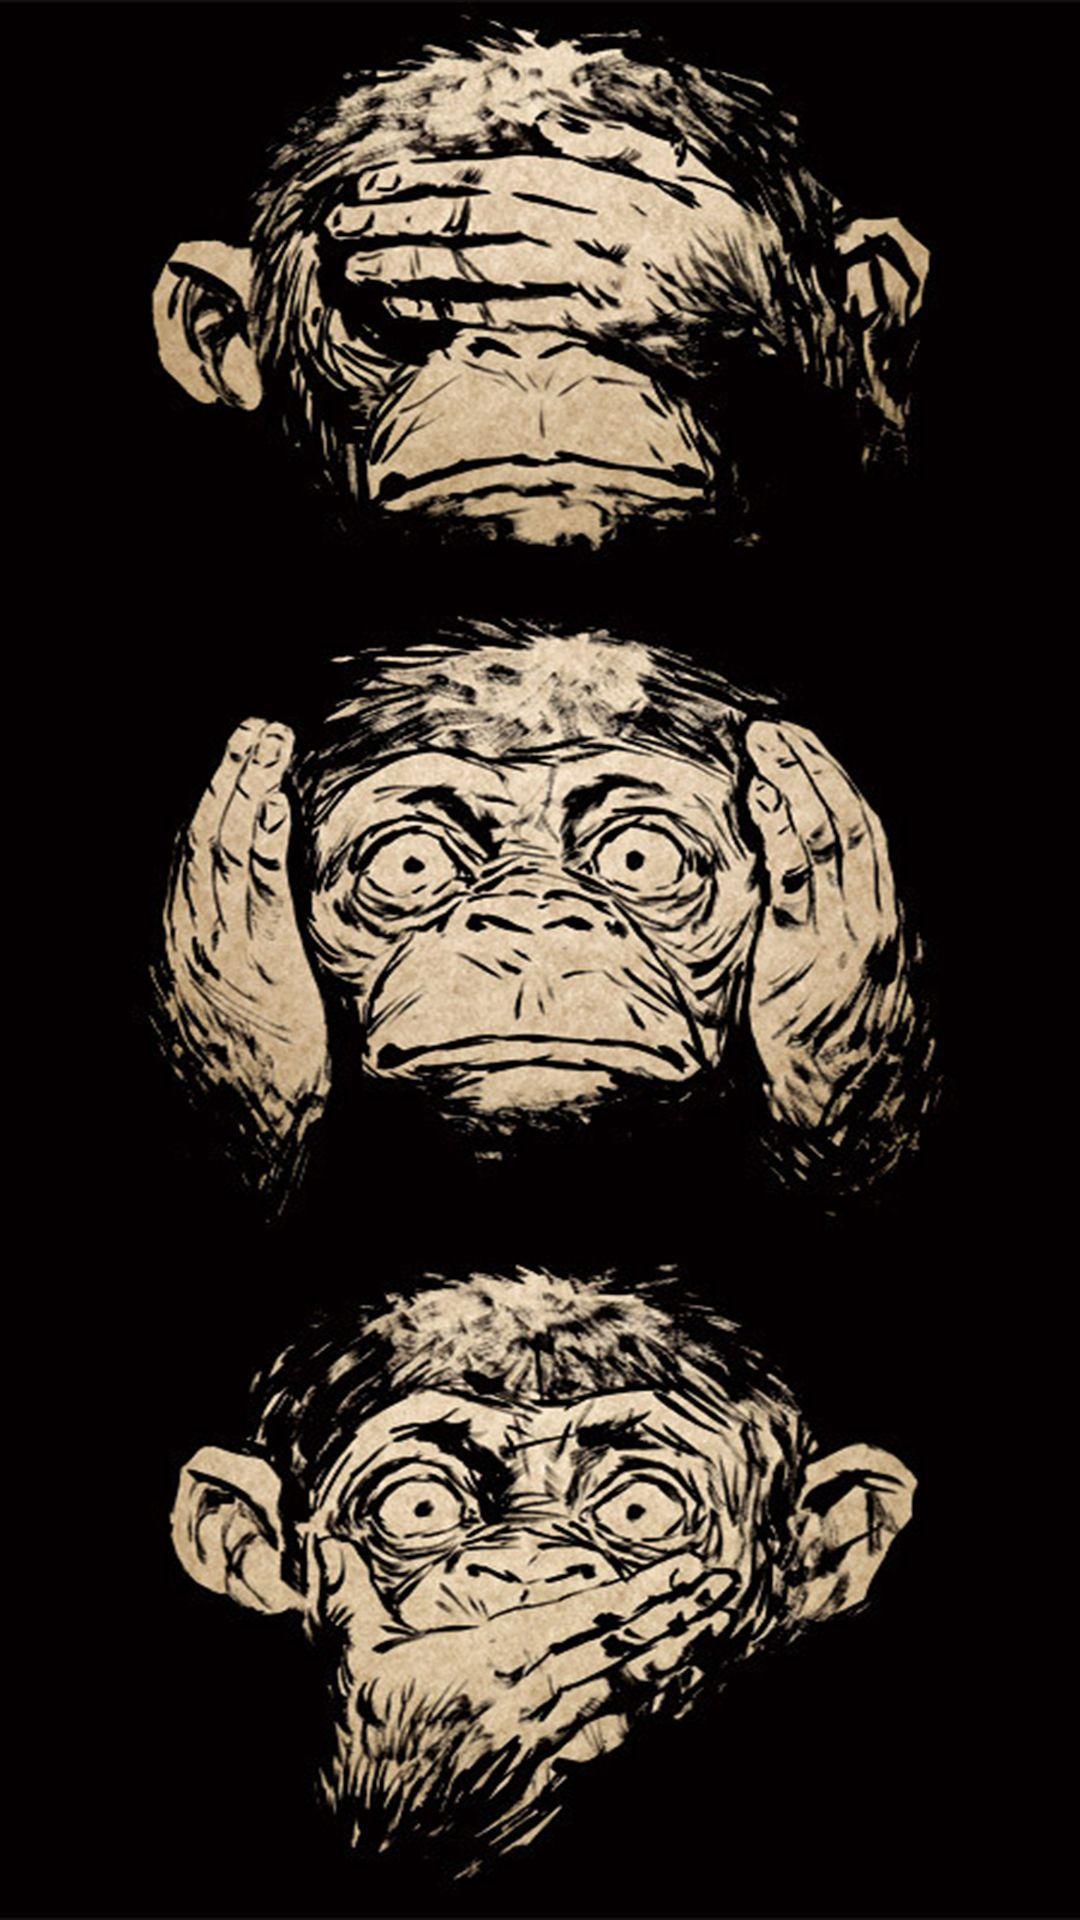 Three Wise Monkeys Wisdom Android Wallpaper free download